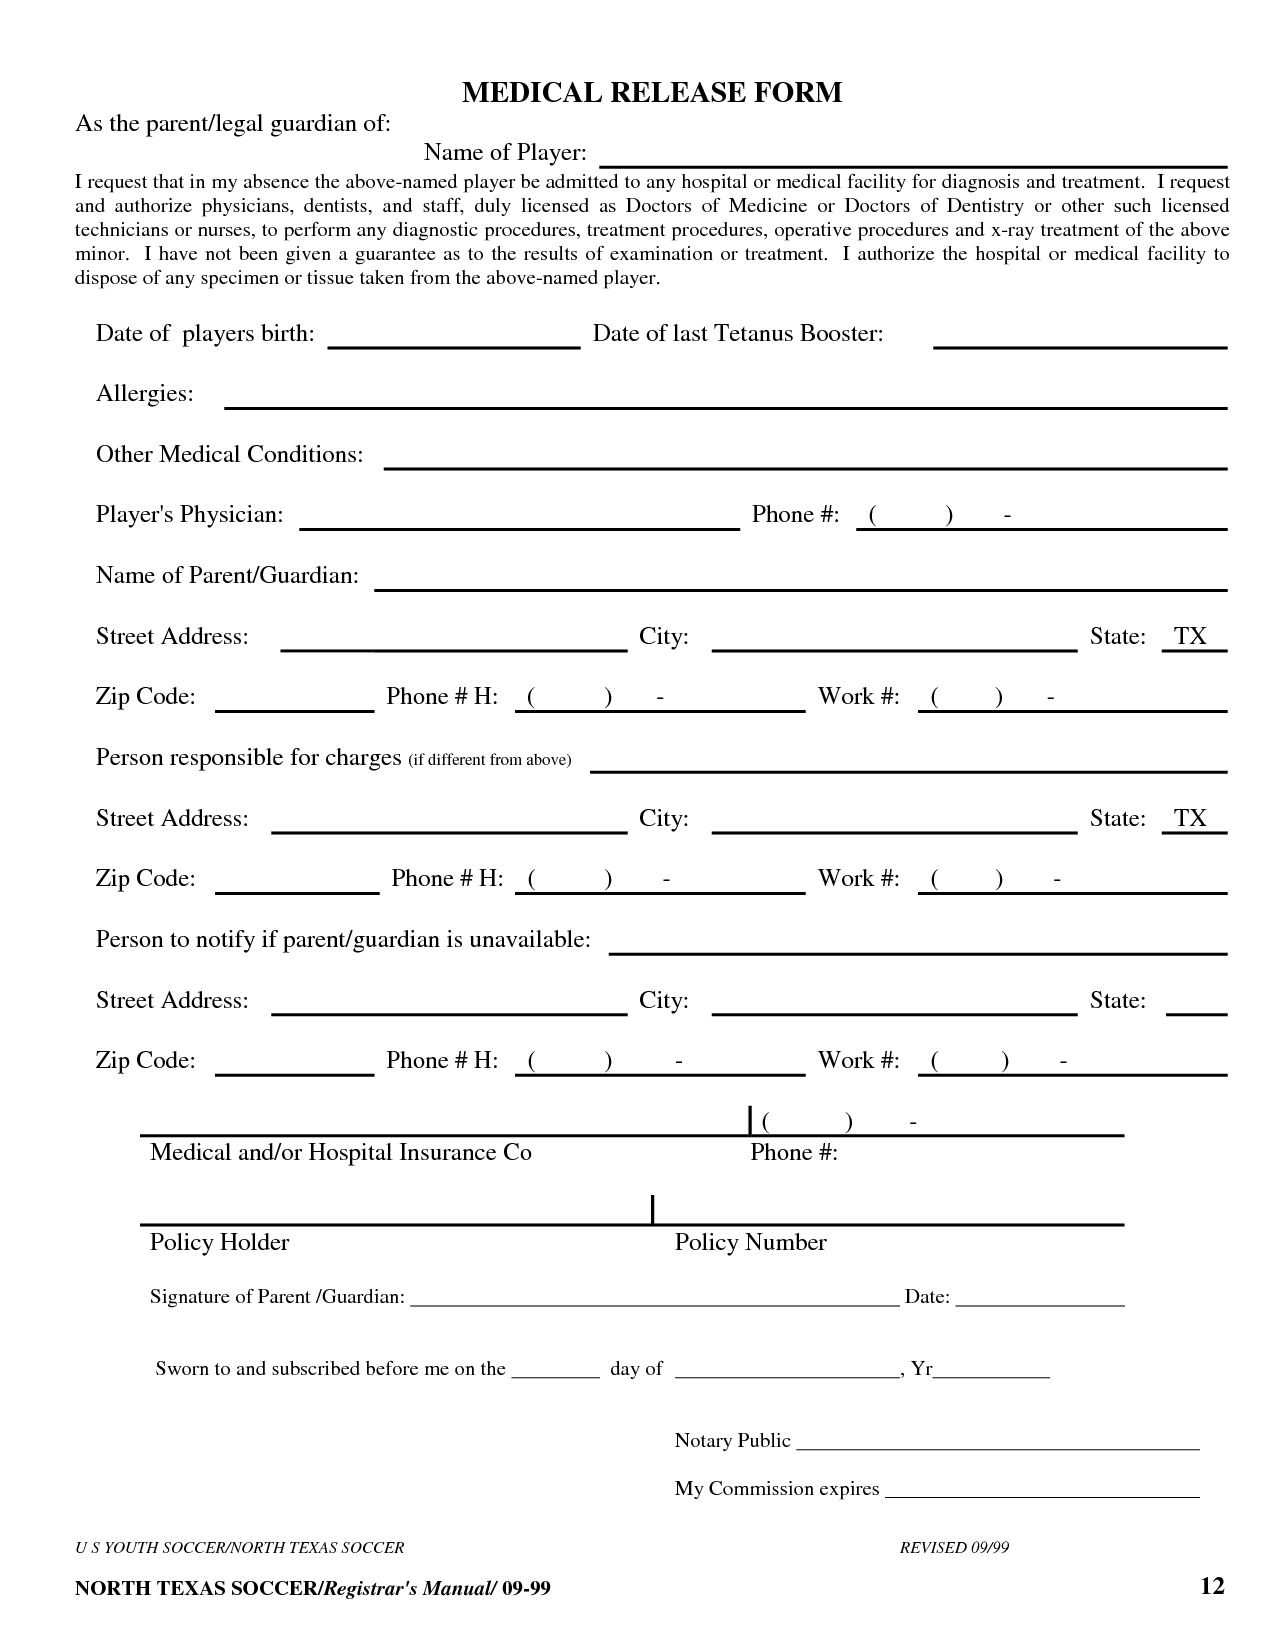 Free Printable Medical Release Form Template | Medical Release Form - Free Printable Medical Release Form